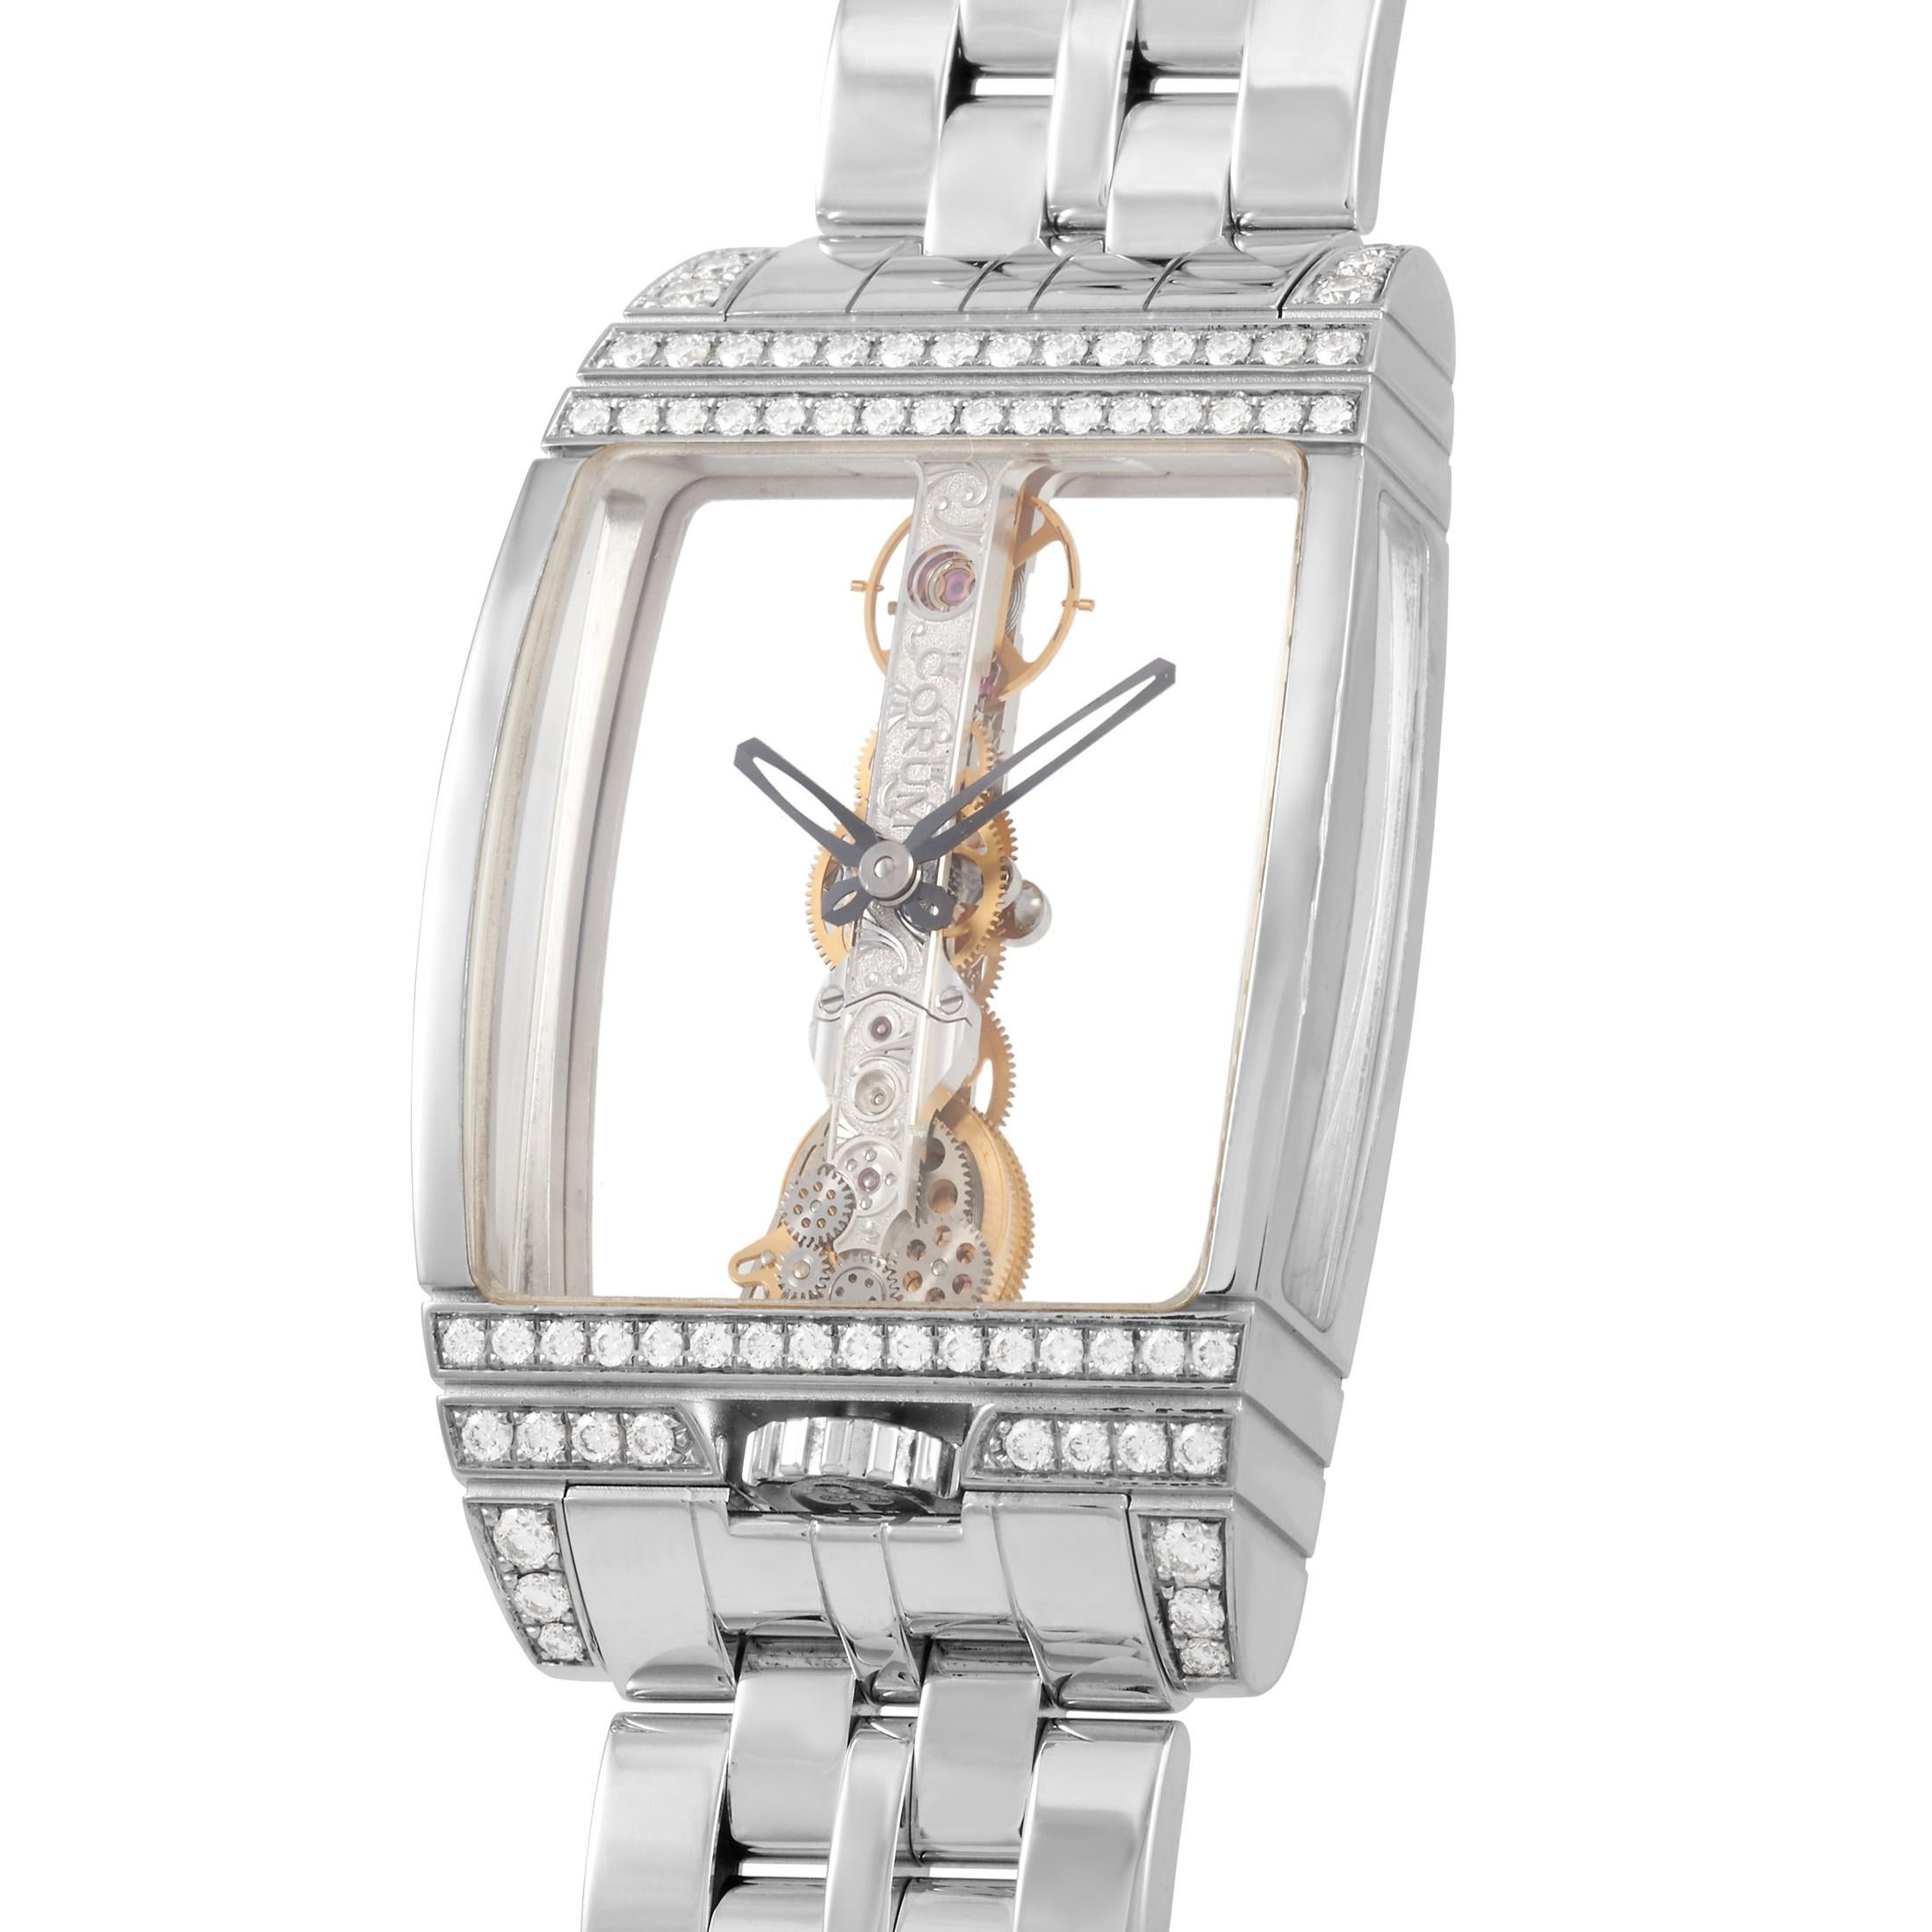 This Corum Golden Bridge 32 mm 18K White Gold 1.25 ct Diamond Watch, reference number 113.553.69.F, comes with an 18K White Gold case that measures 32 mm in diameter and is set with 1.25 carats of pave diamonds along the top and bottom. The case is